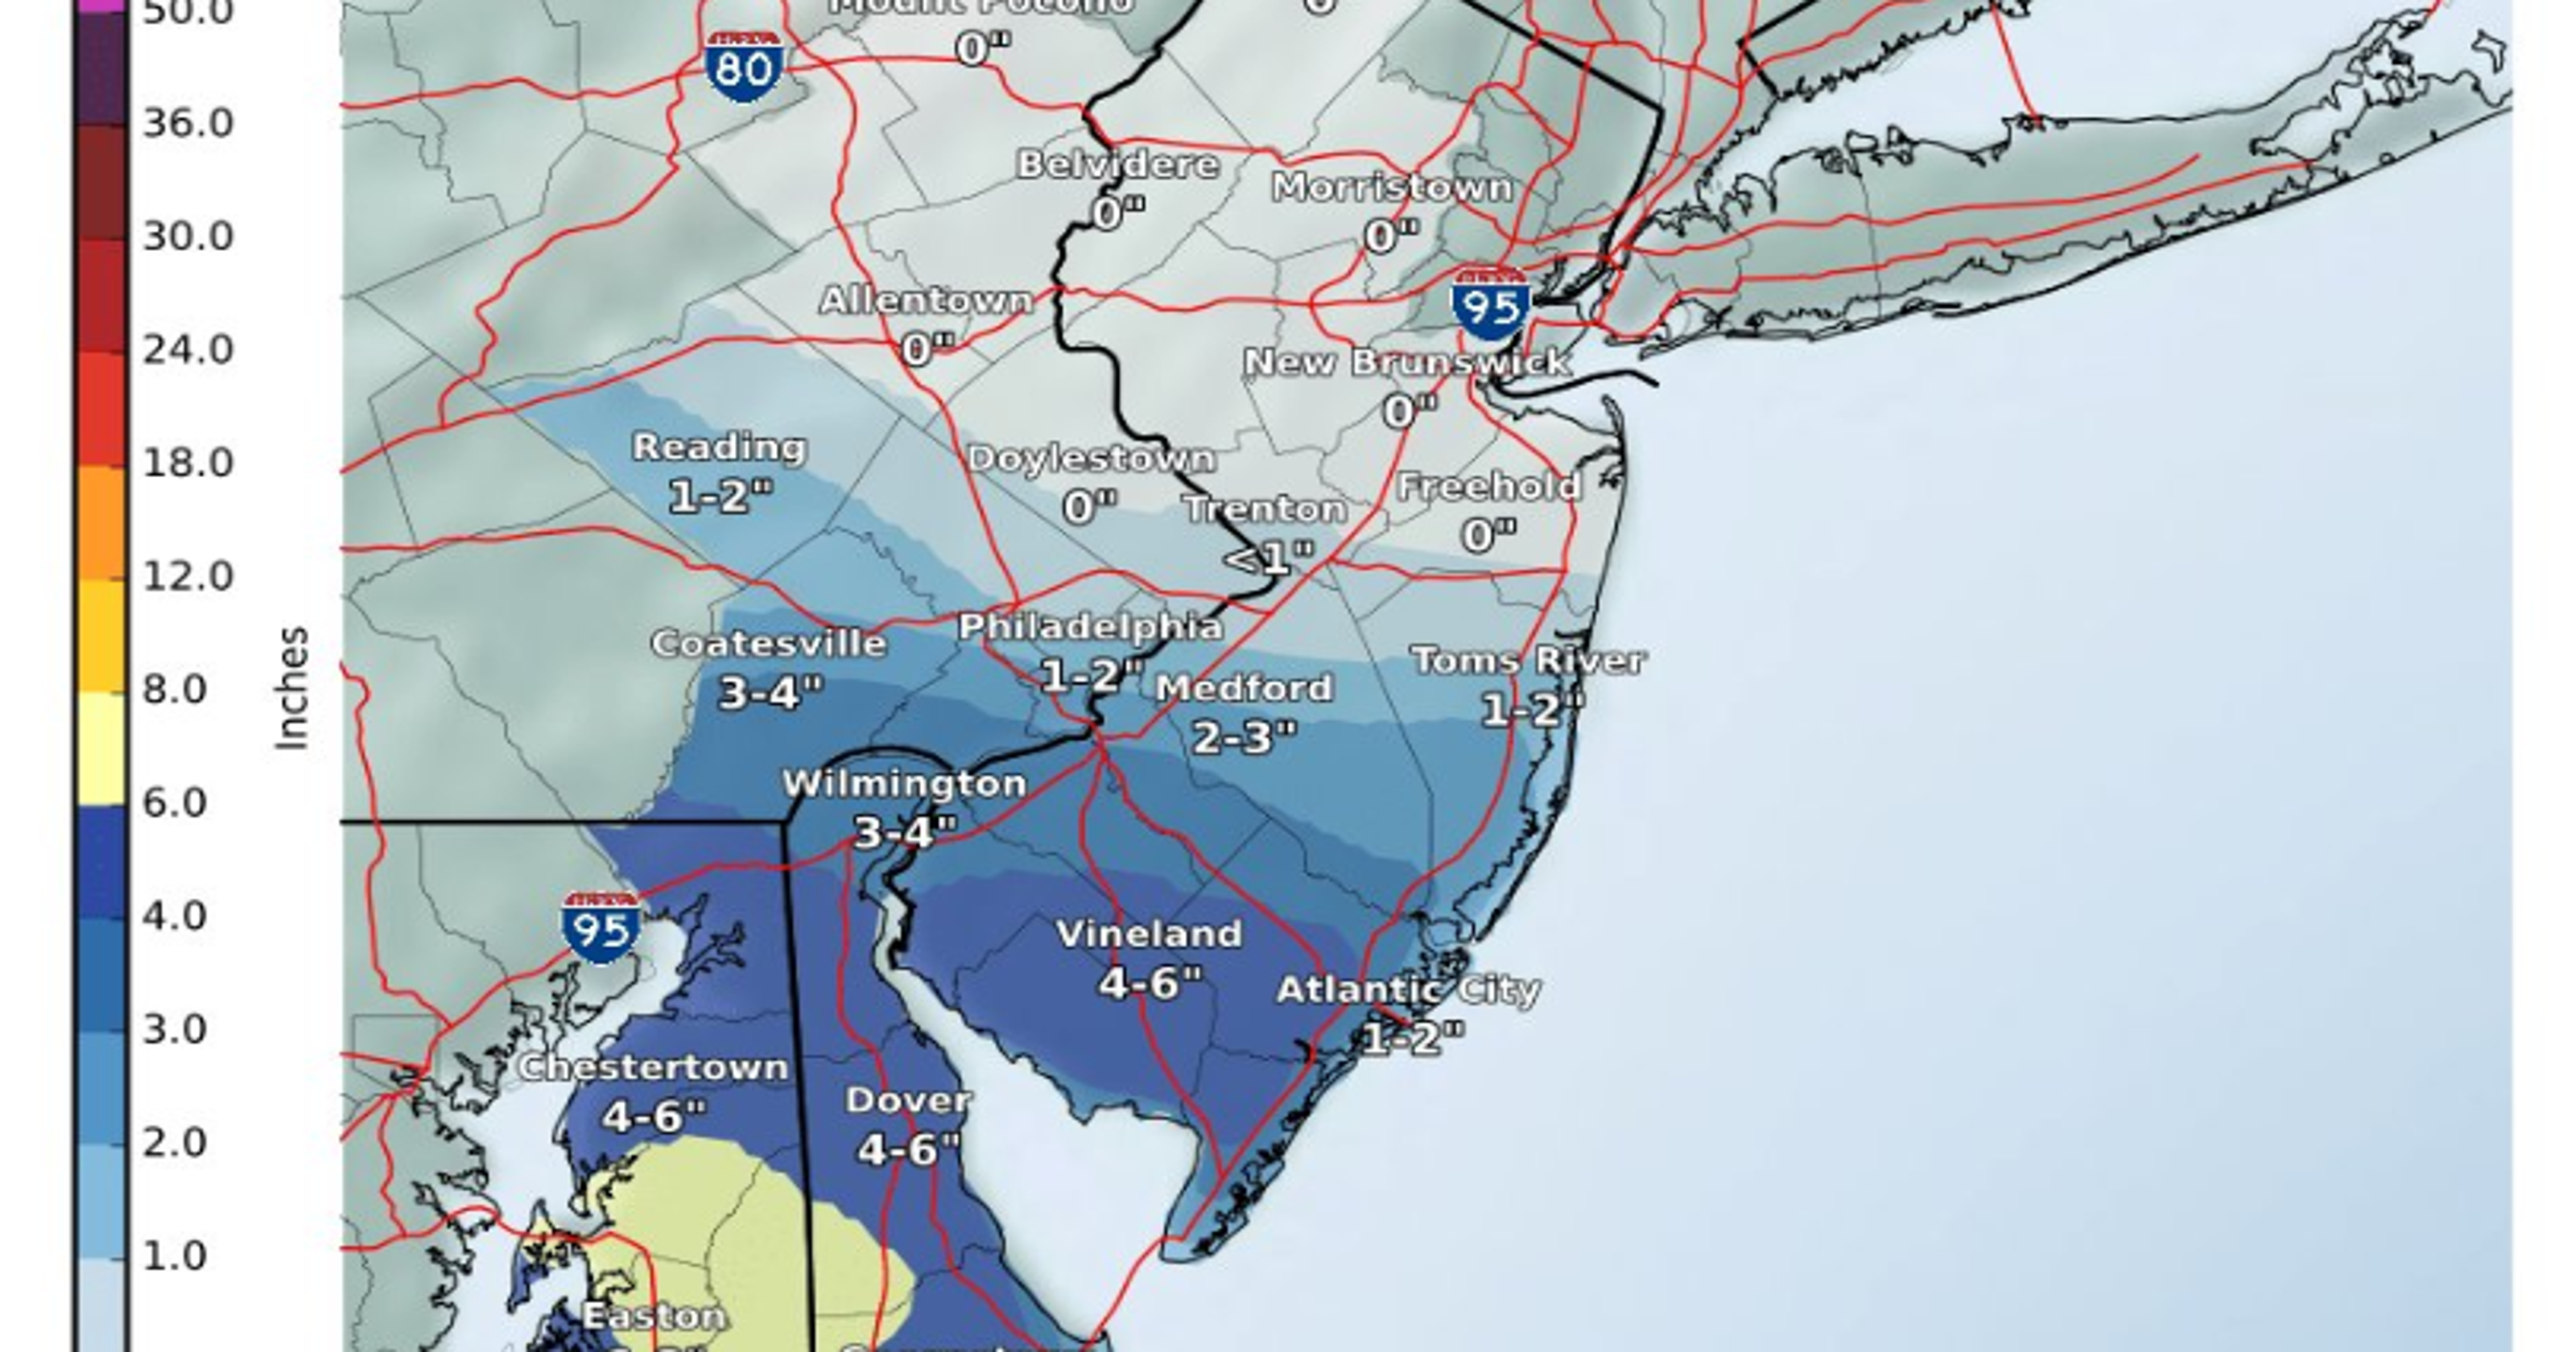 Delaware snowfall forecast upgraded 36 inches of snow expected